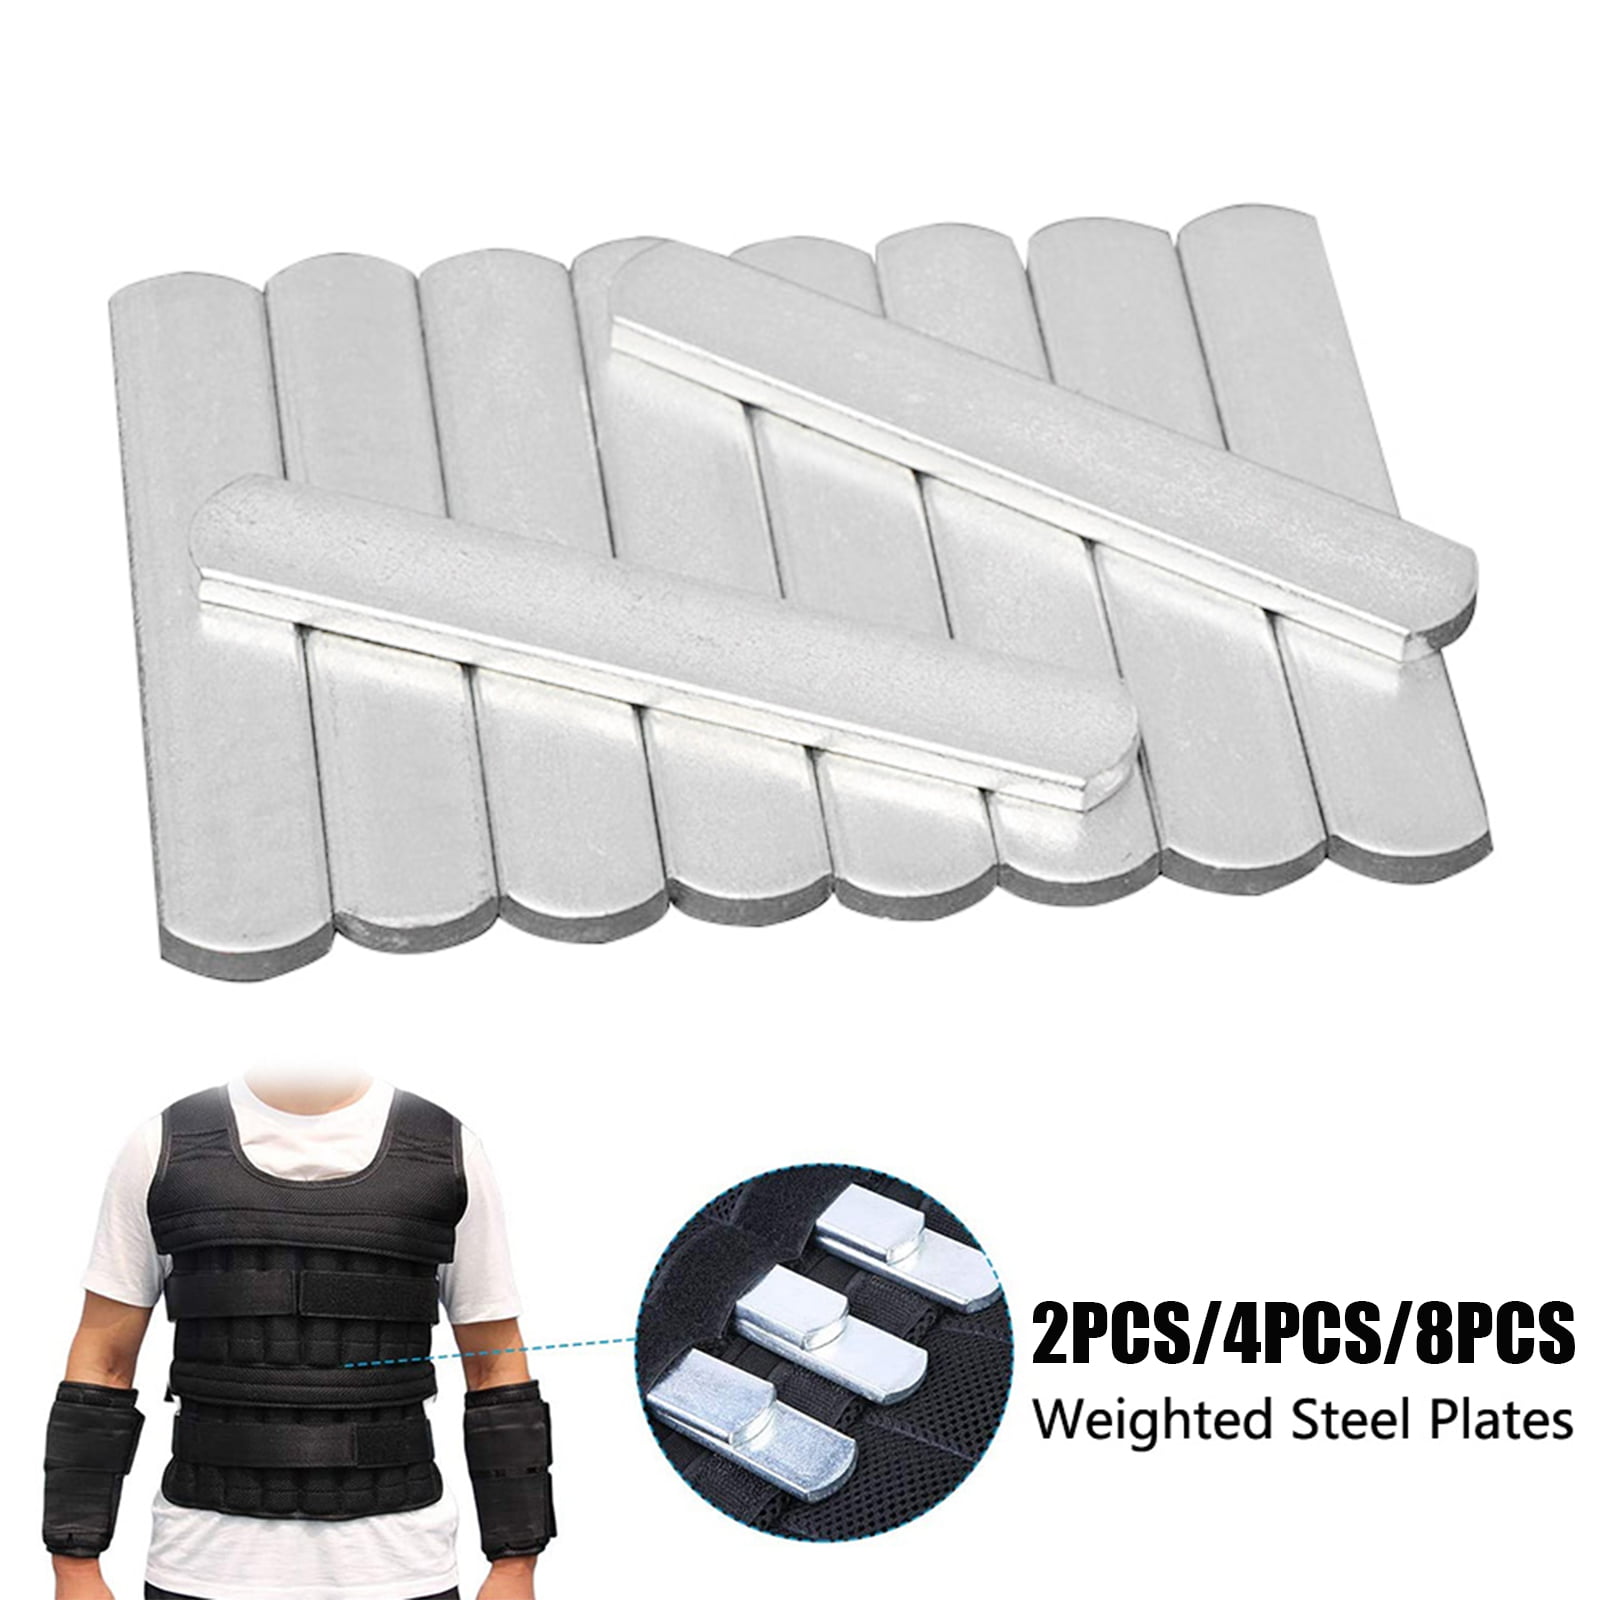 Details about   6pcs Stainless Steel Plates Rounded Steel Weighted Vest Plates Ankle Weights 